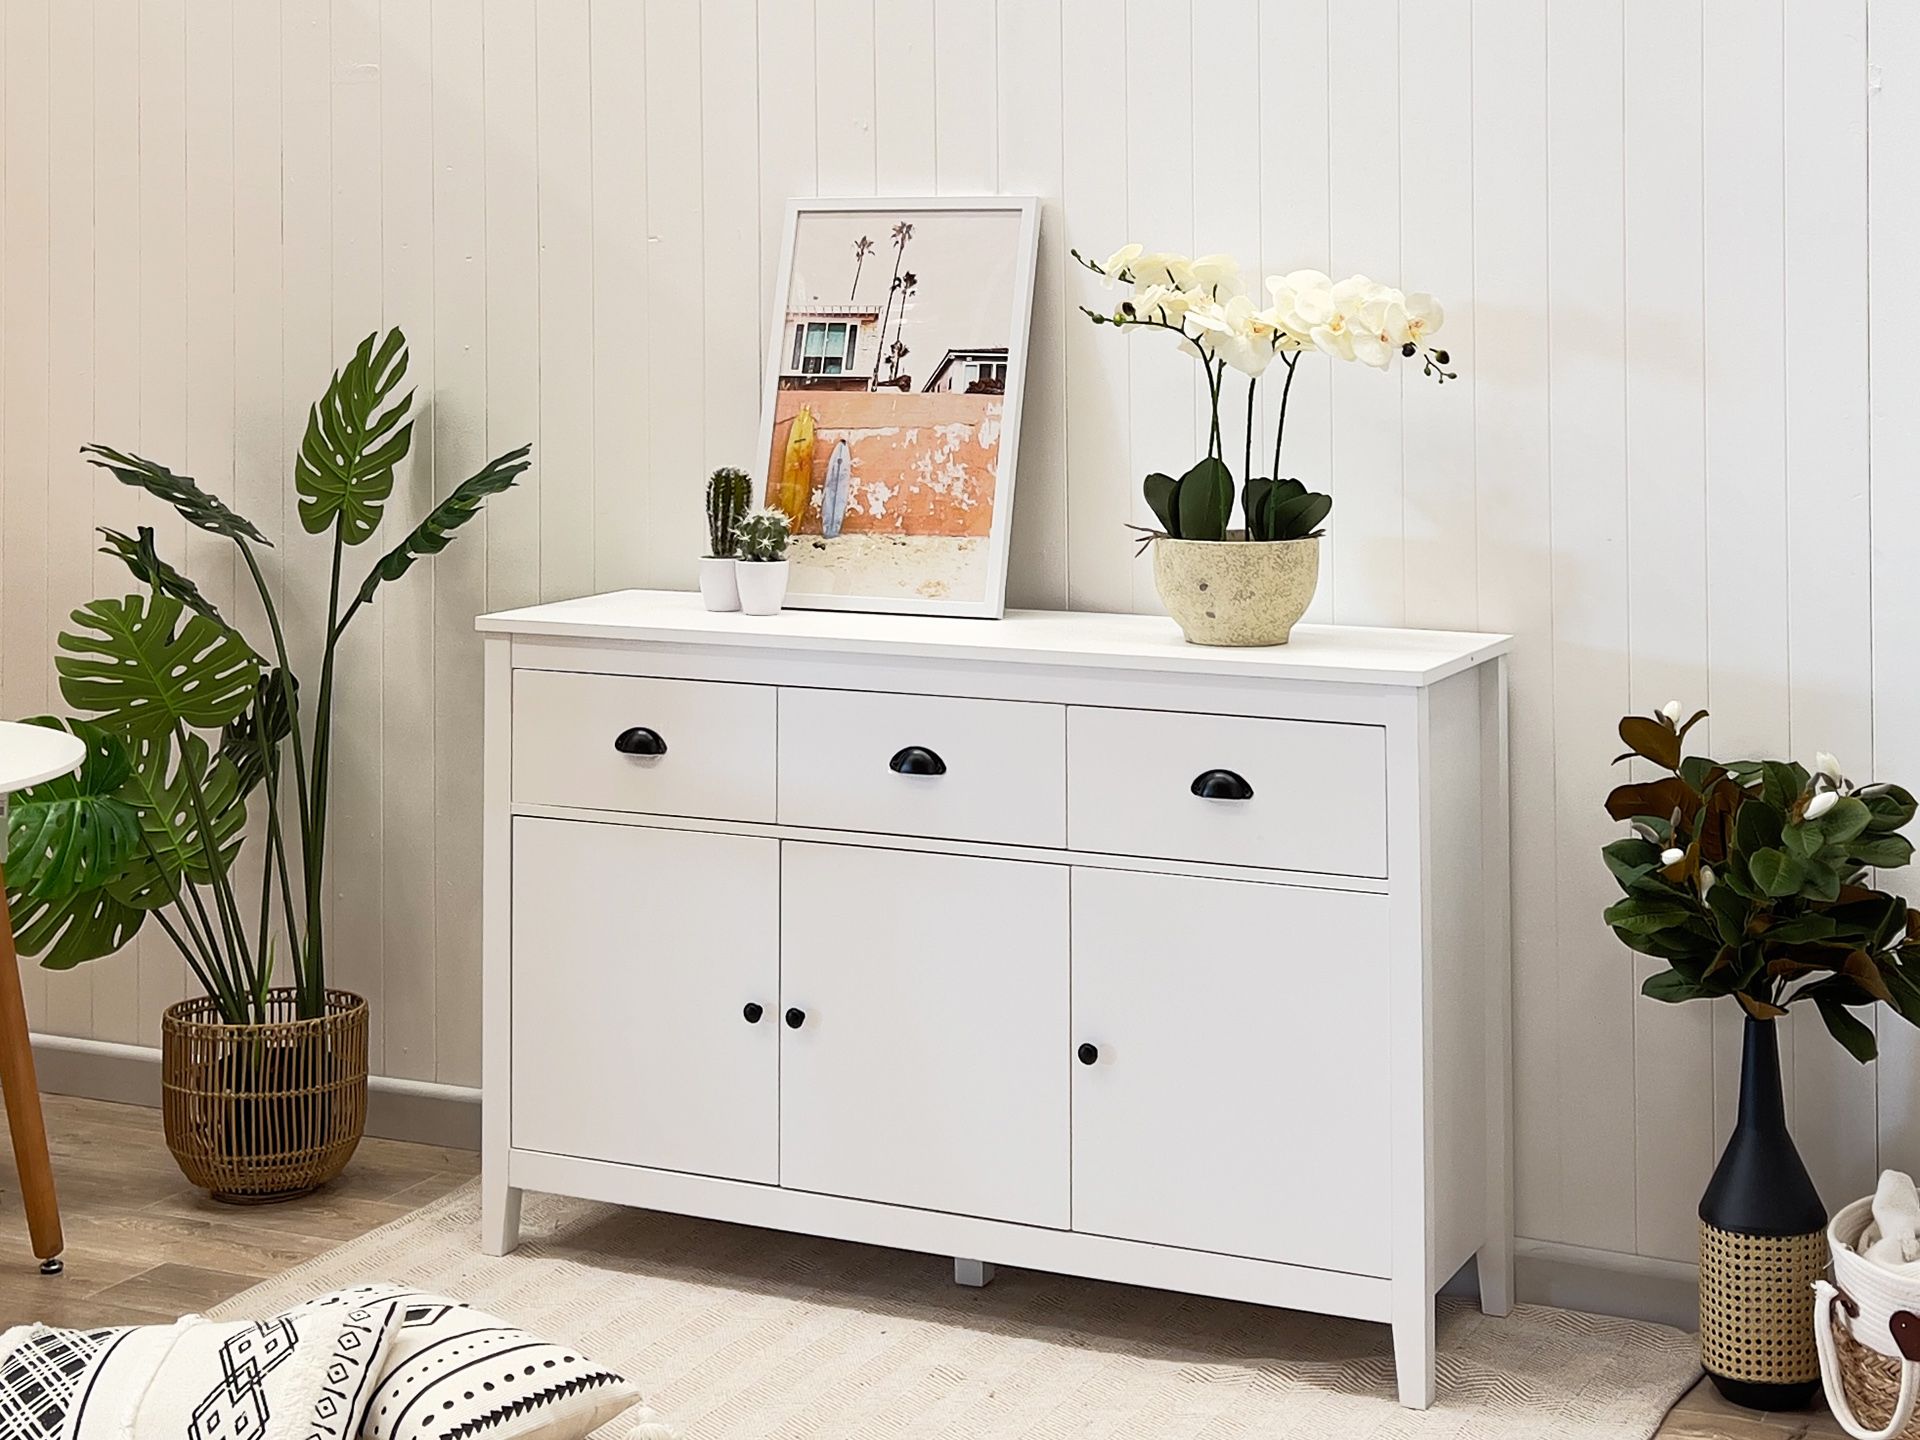 CONGO Sideboard Buffet Table - WHITE